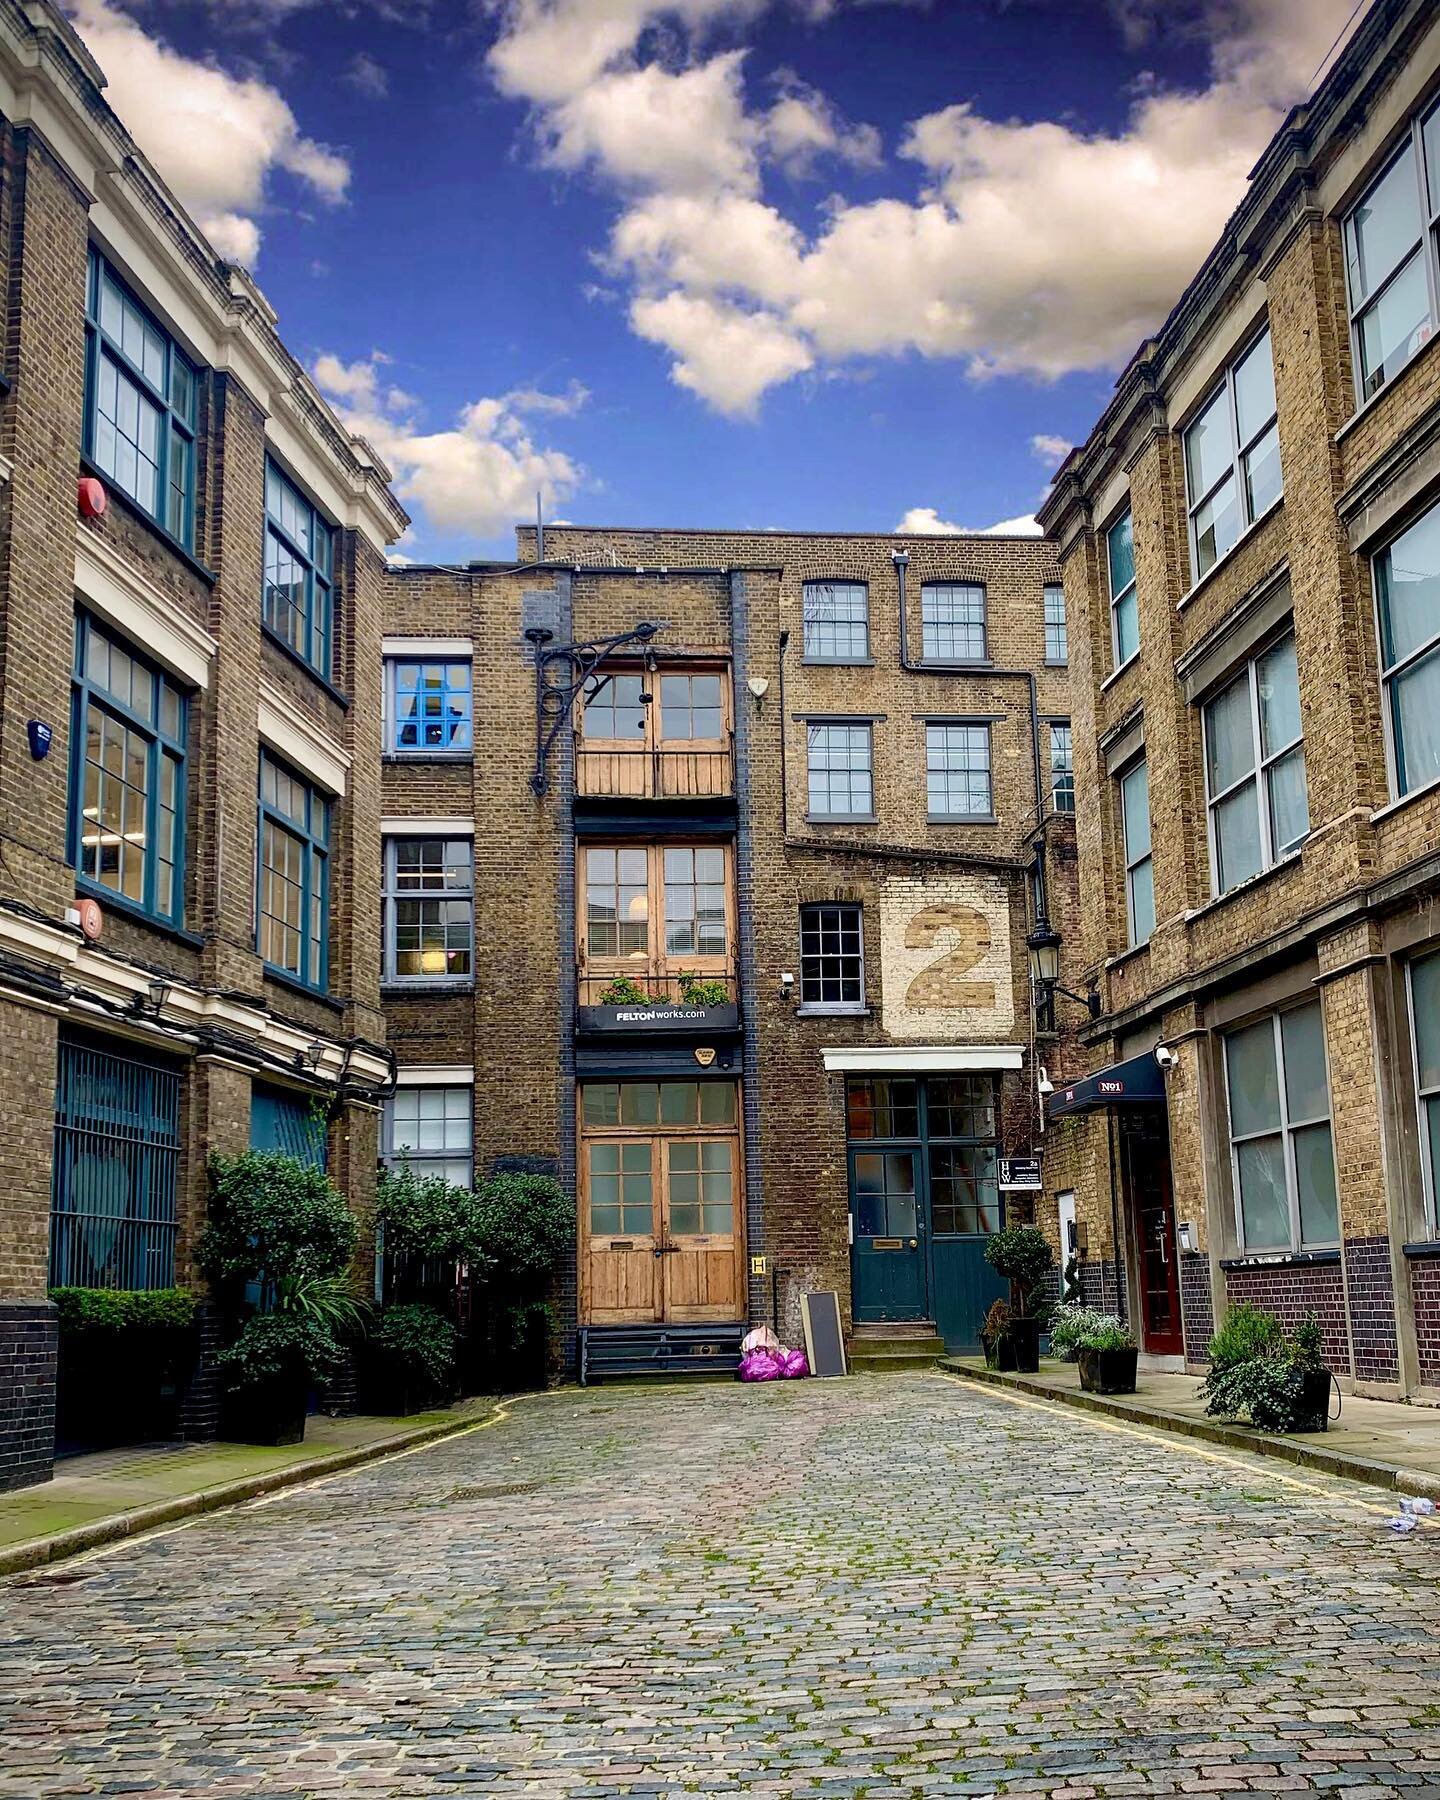 Bleeding Heart Yard, Farringdon, London EC1 - a beautiful hidden courtyard with an amazing street name! Originates from a 16th century inn of the same name. Also featured in the book &lsquo;Little Dorrit&rsquo; by Charles Dickens. A real gem and shor